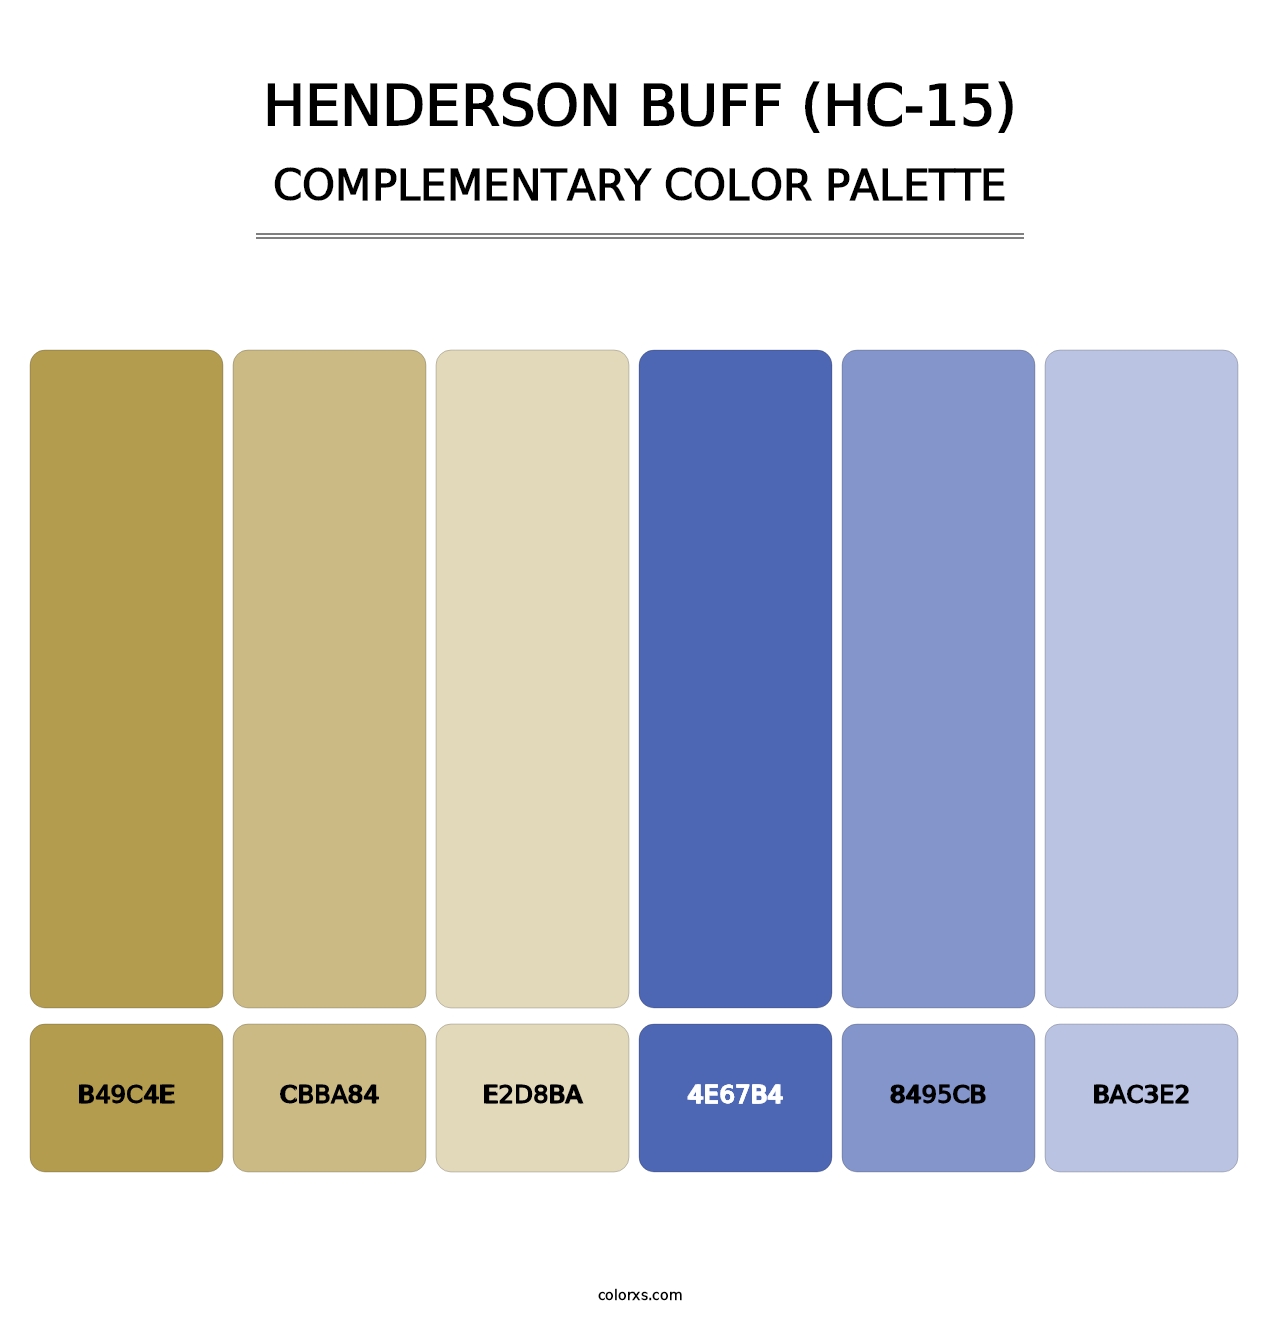 Henderson Buff (HC-15) - Complementary Color Palette